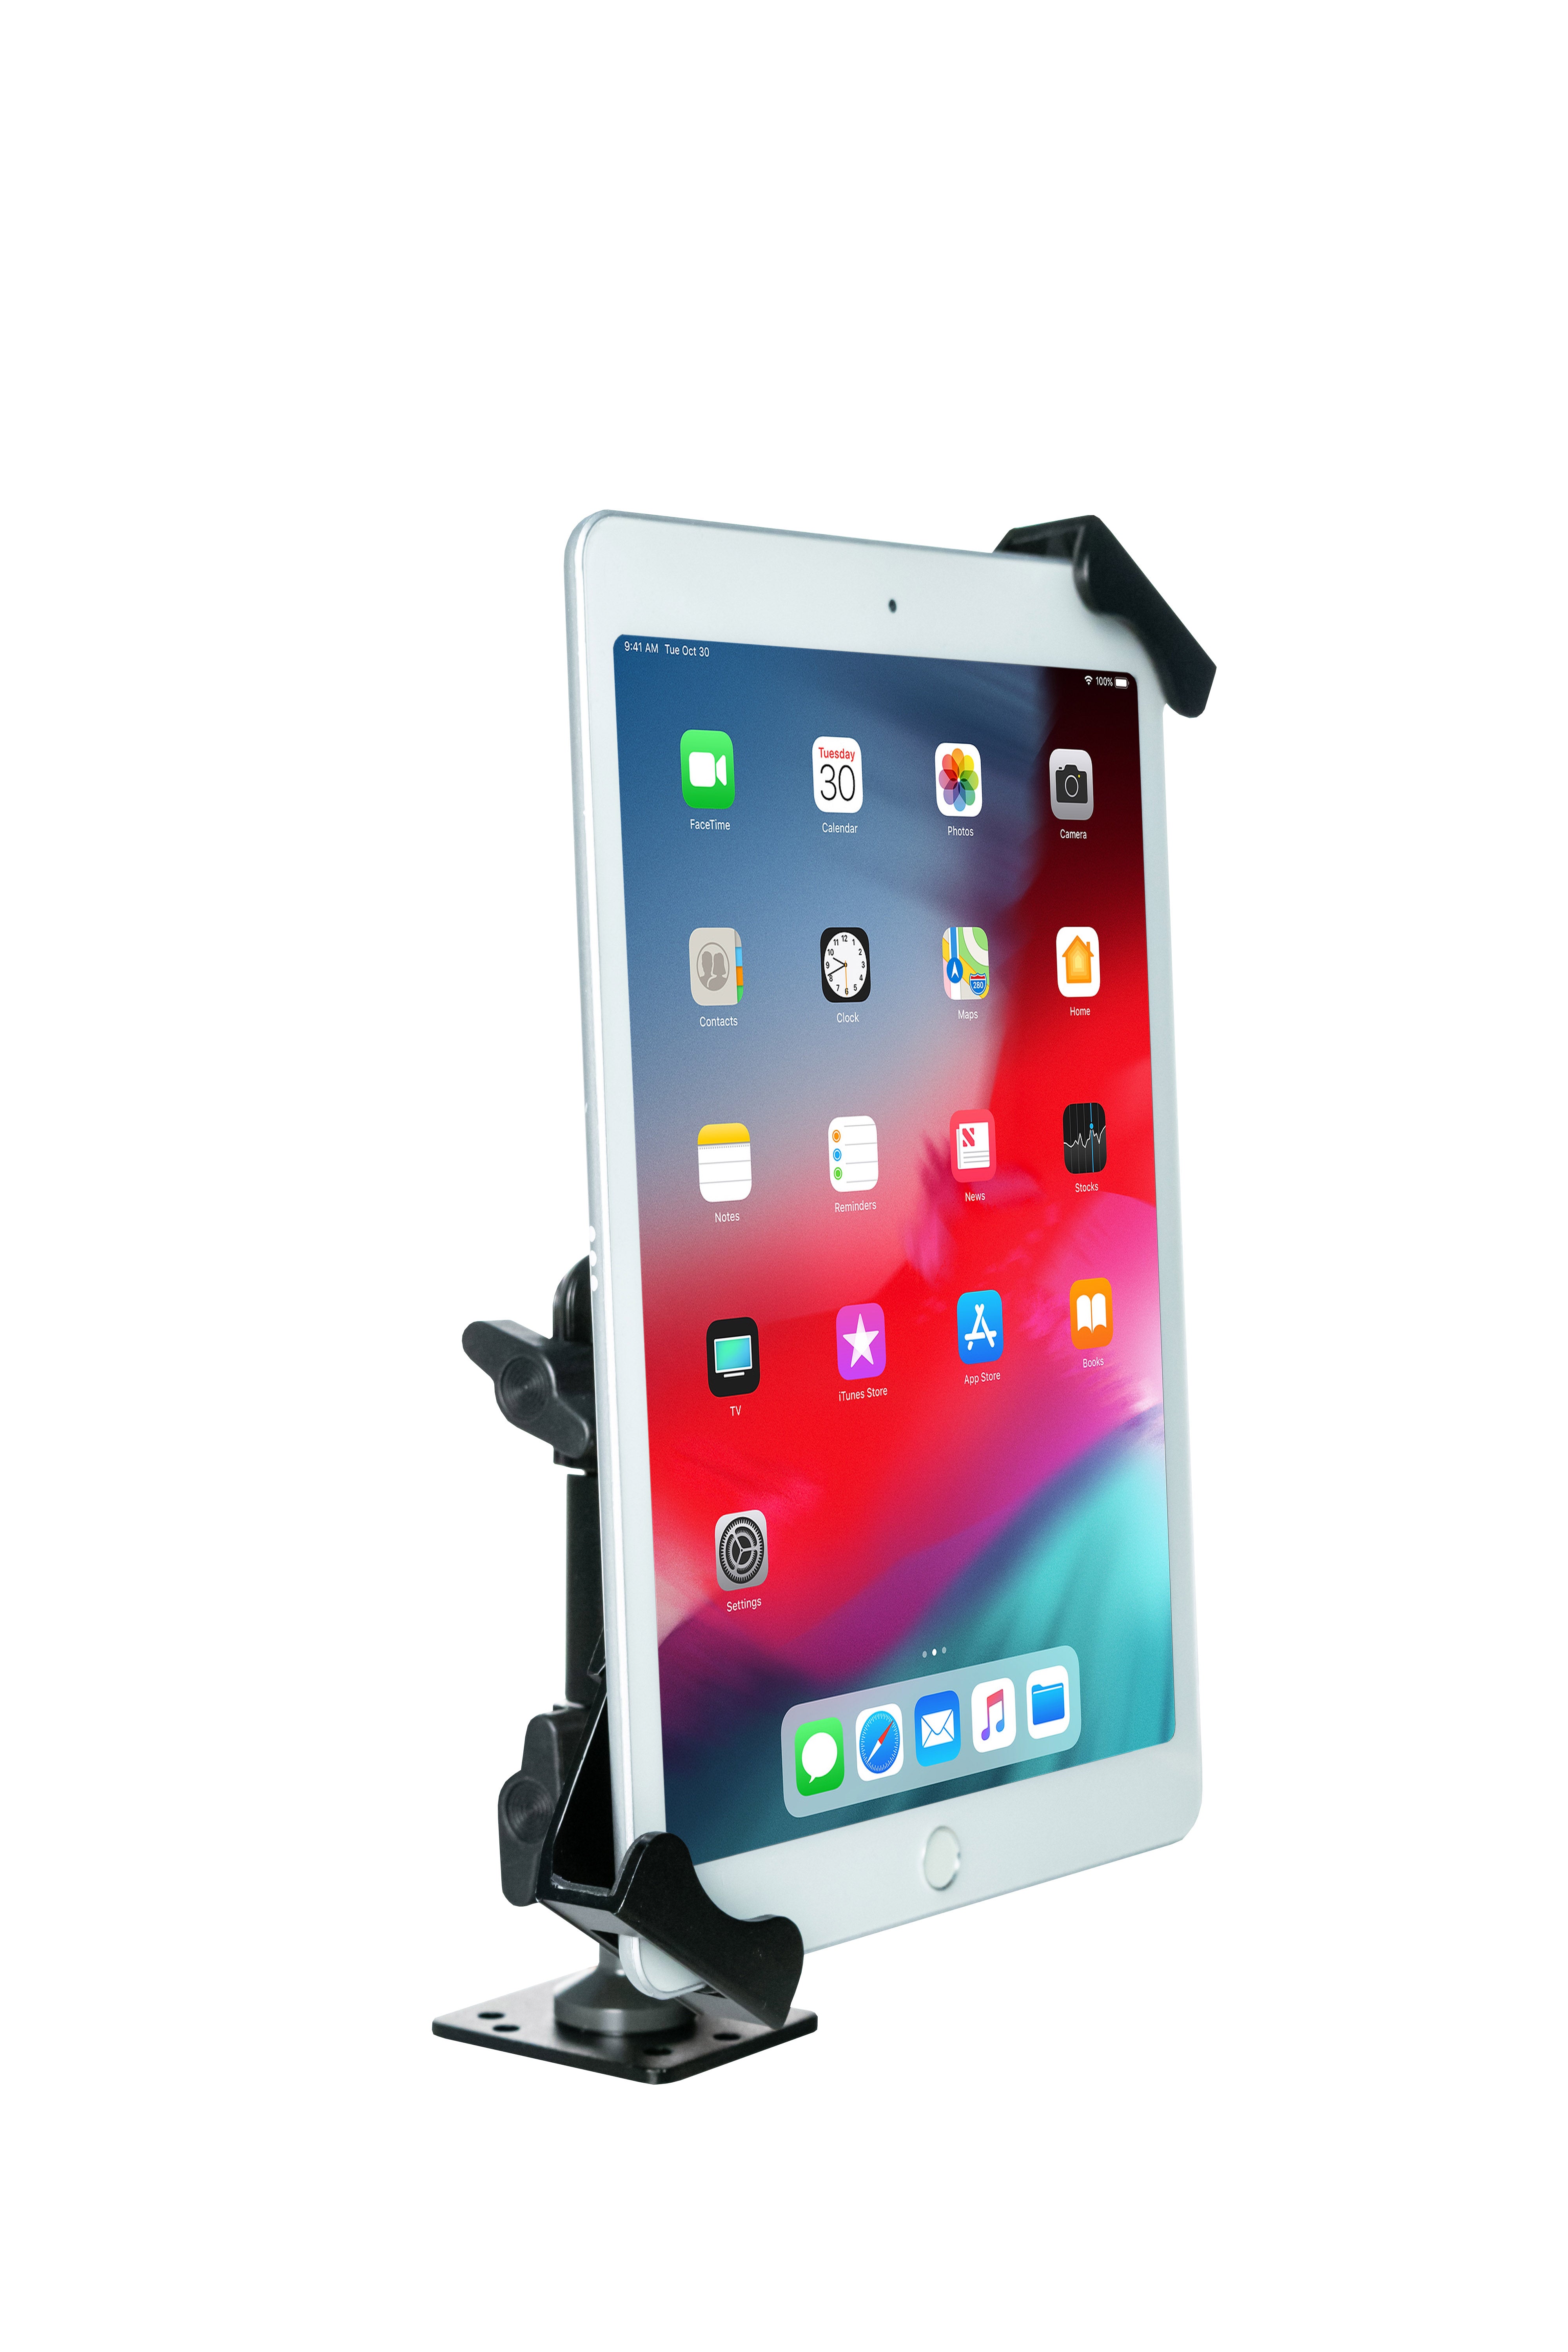 Security Vehicle Dashboard Mount for 7-14 Inch Tablets, including iPad 10.2-inch (7th/ 8th/ 9th Generation)